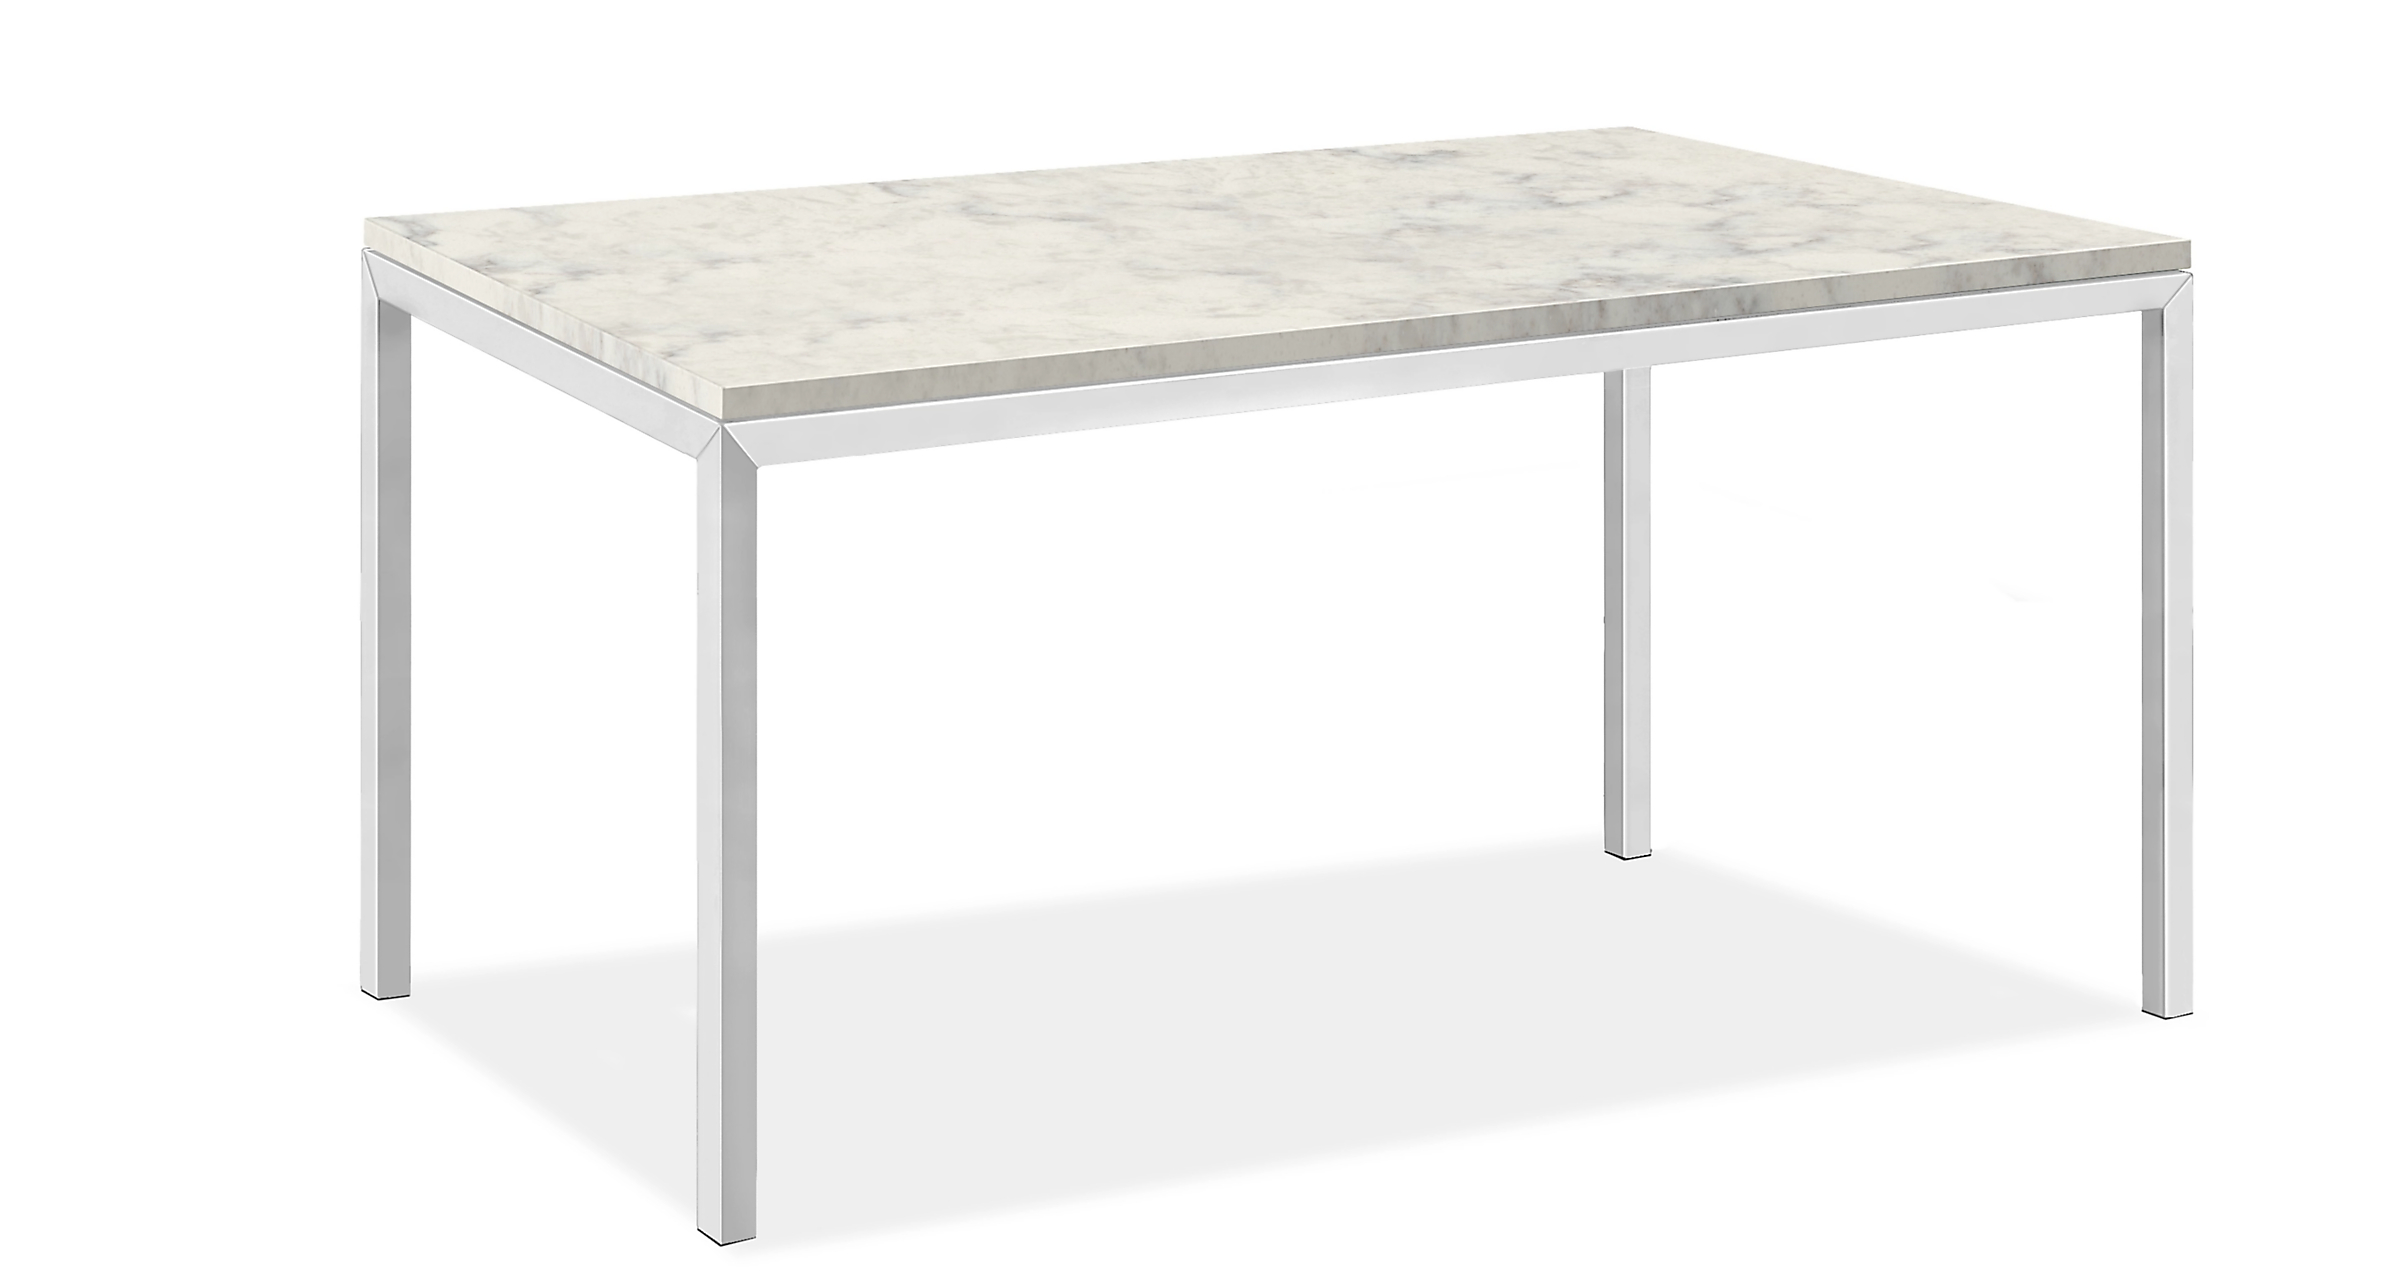 Parsons 56w 48d 31h Dining Table in 1.5" Stainless Steel w/Marbled White Quartz